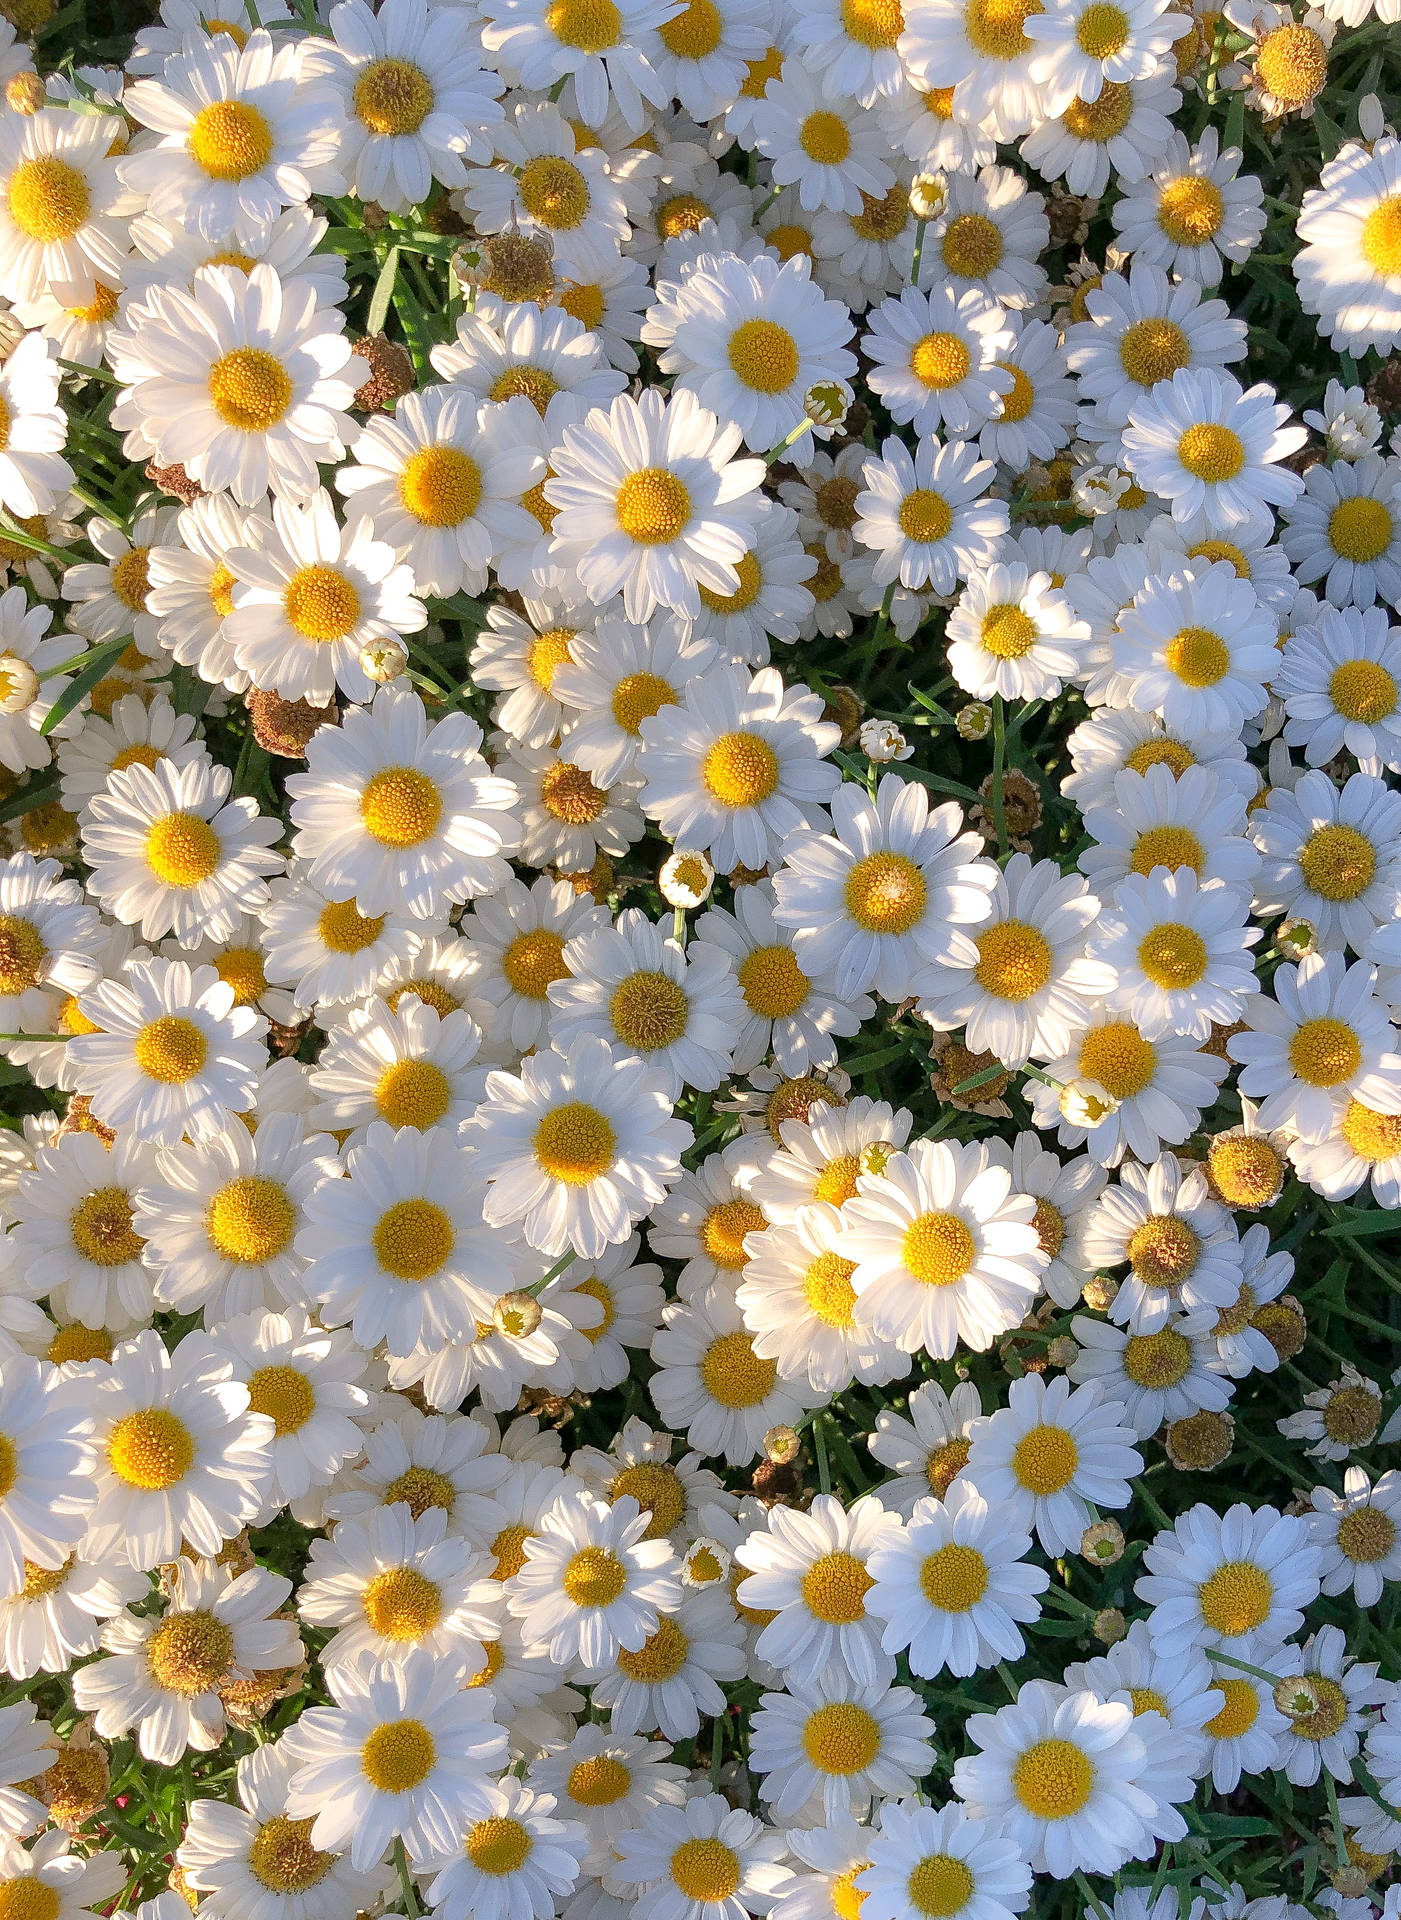 Daisy 2687X3683 Wallpaper and Background Image